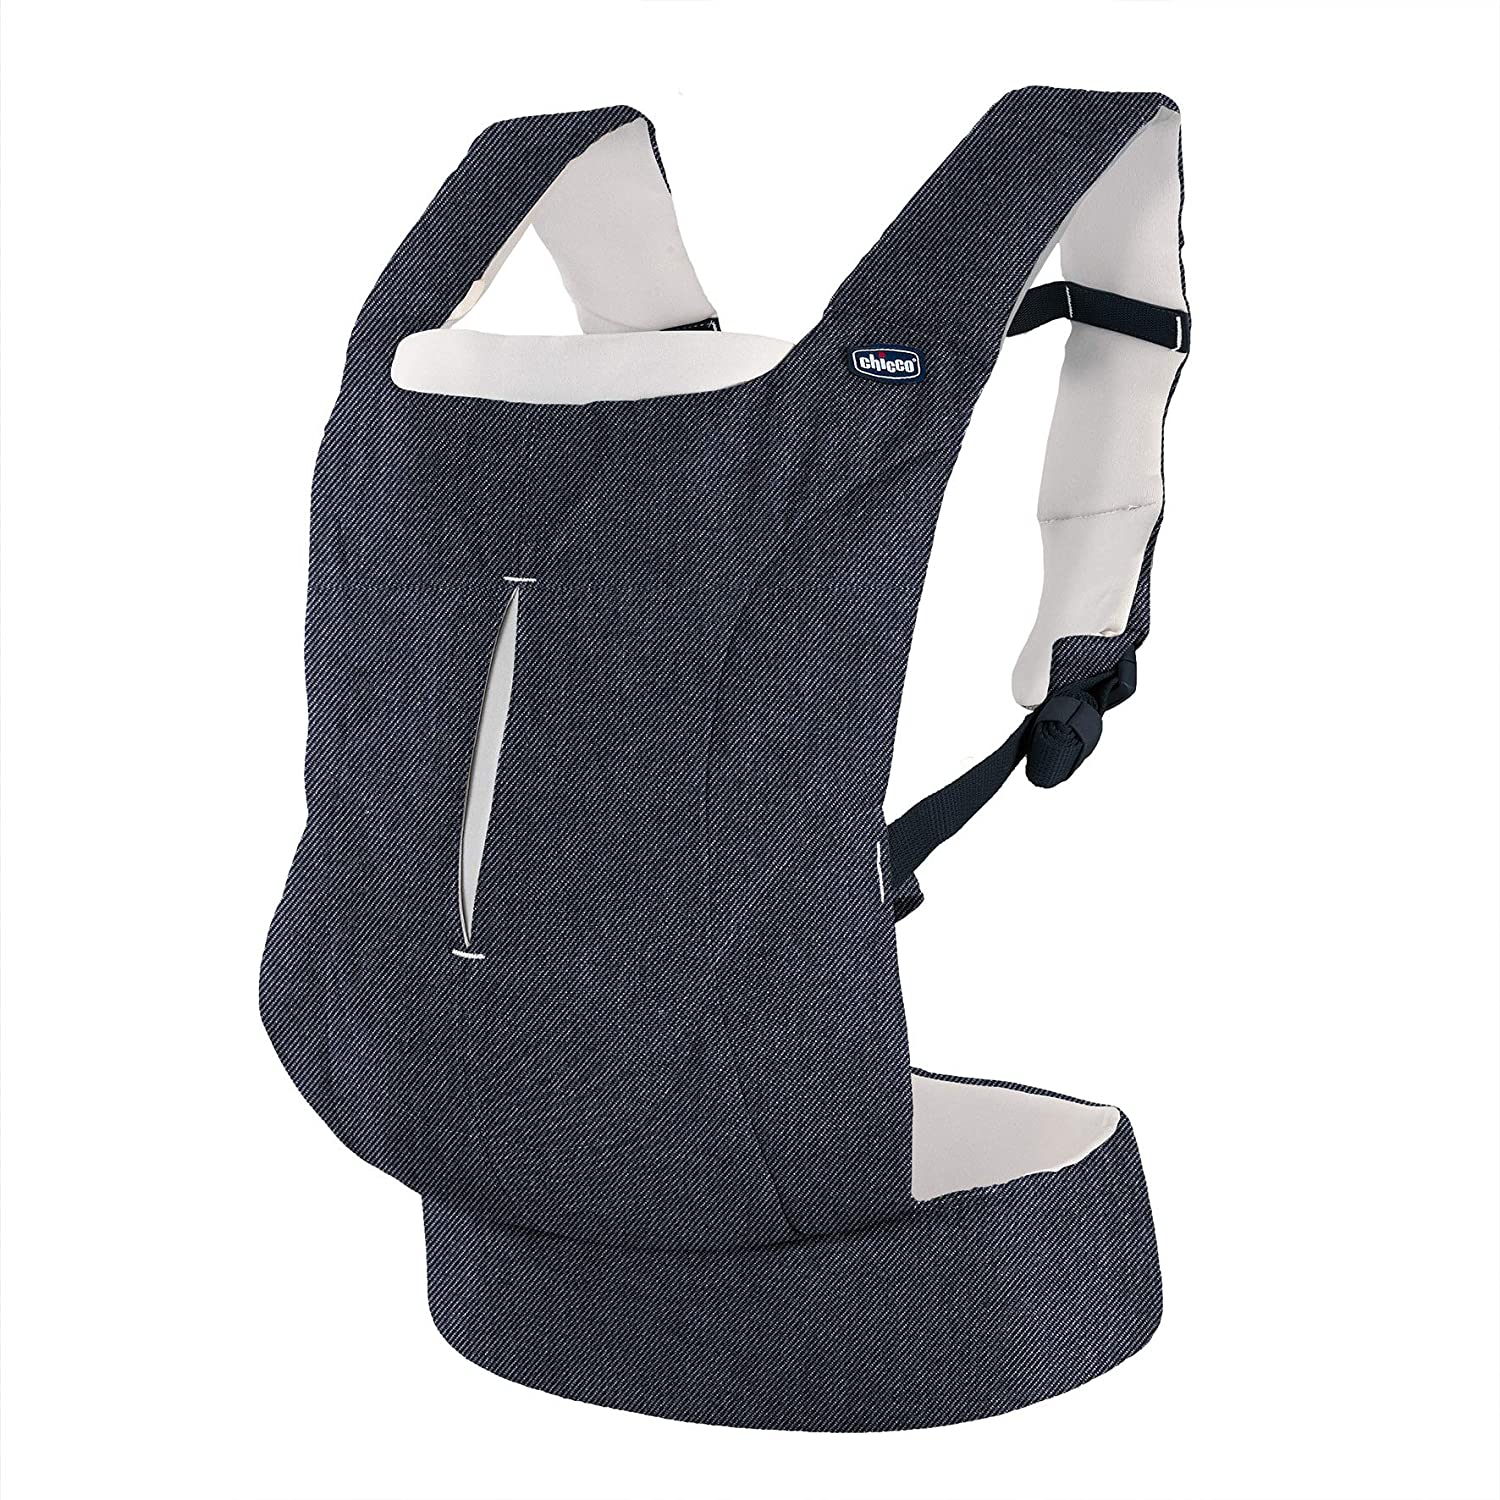 Chicco Myamaki Complete Baby Carrier Ergonomic and Safe for Babies Hip and Back, Breathable 3D Fabric, from Birth to 15 kg, Grey